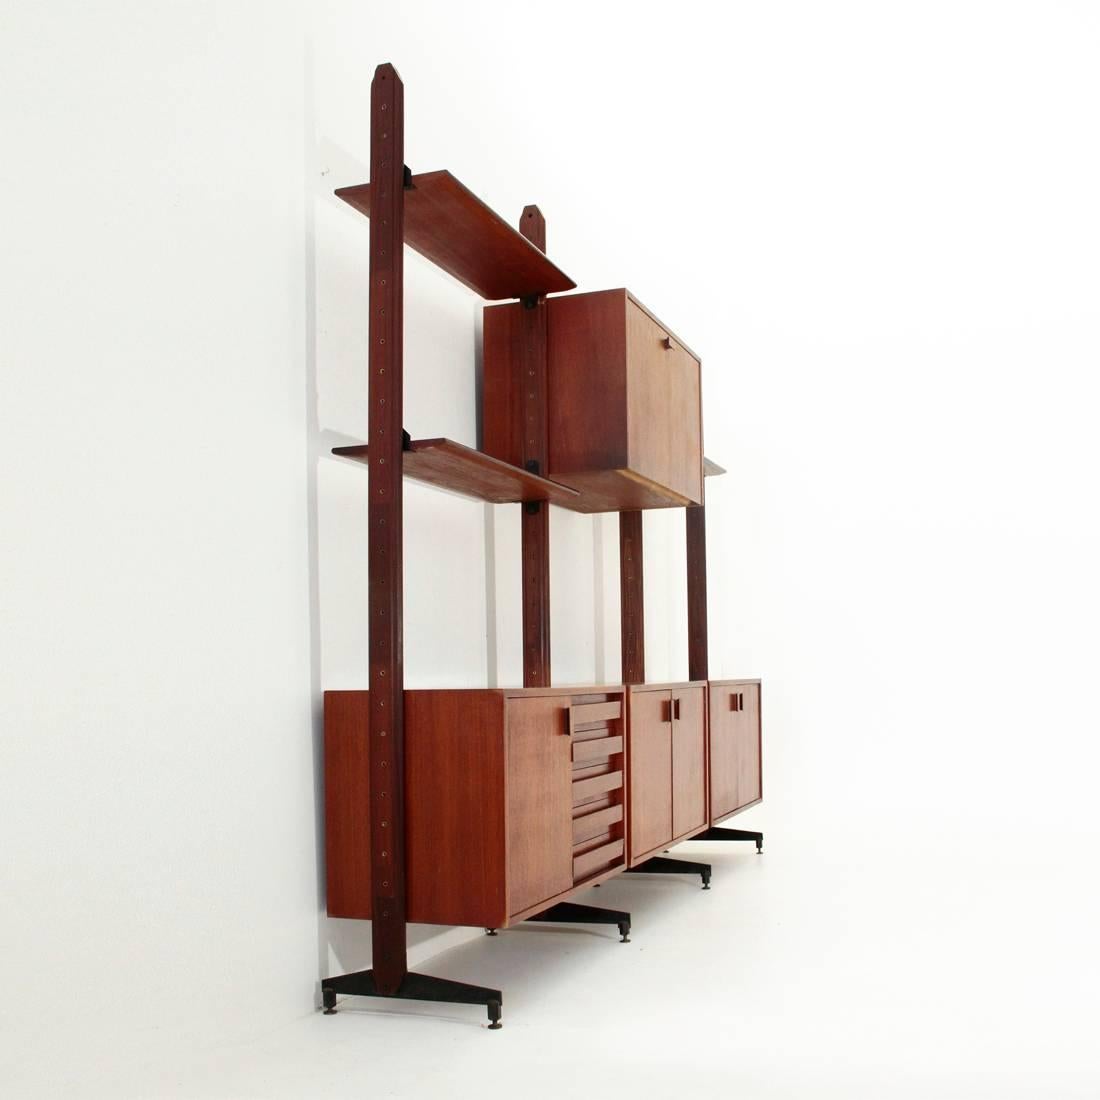 Italian Library, 1960s.
Wooden uprights with black painted metal feet and brass adjustable terminal.
Three shelves, a chest of drawers, a sloping compartment and two open-door compartments.
Good general conditions, some signs and veneers on the